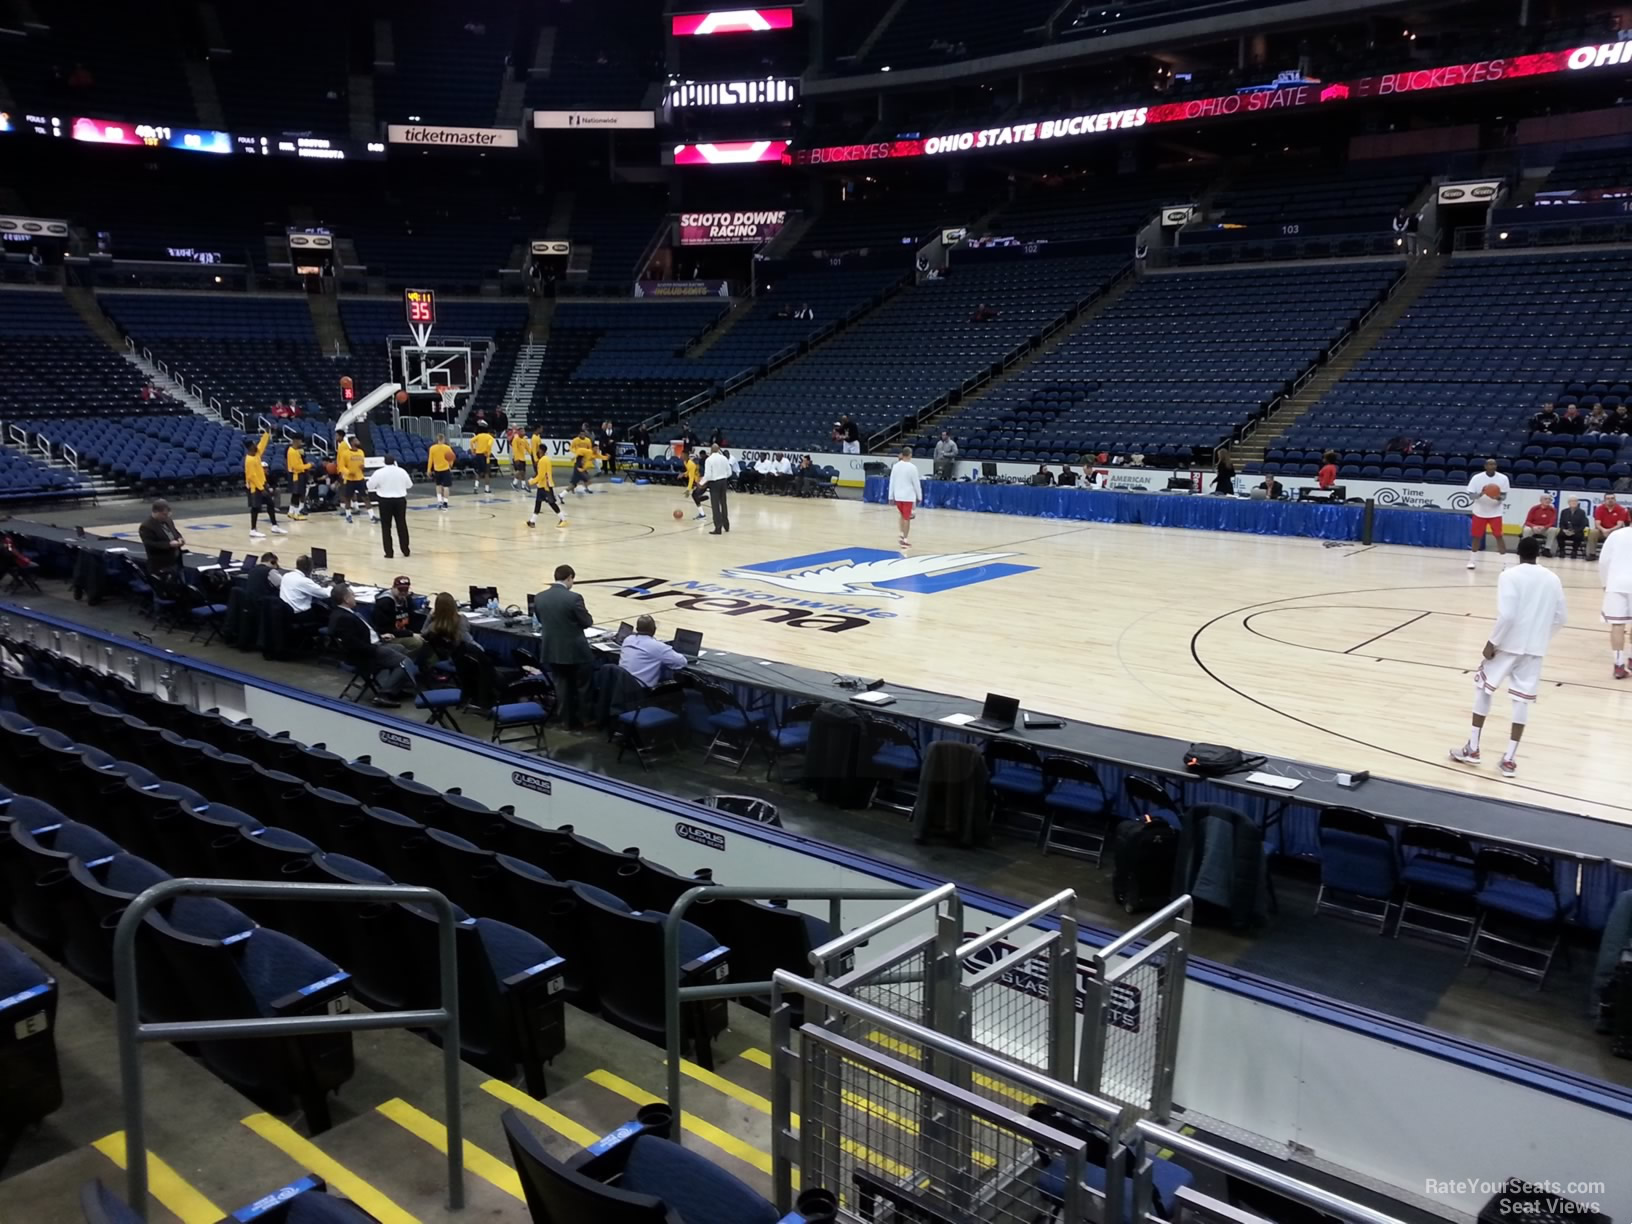 section 113, row g seat view  for basketball - nationwide arena